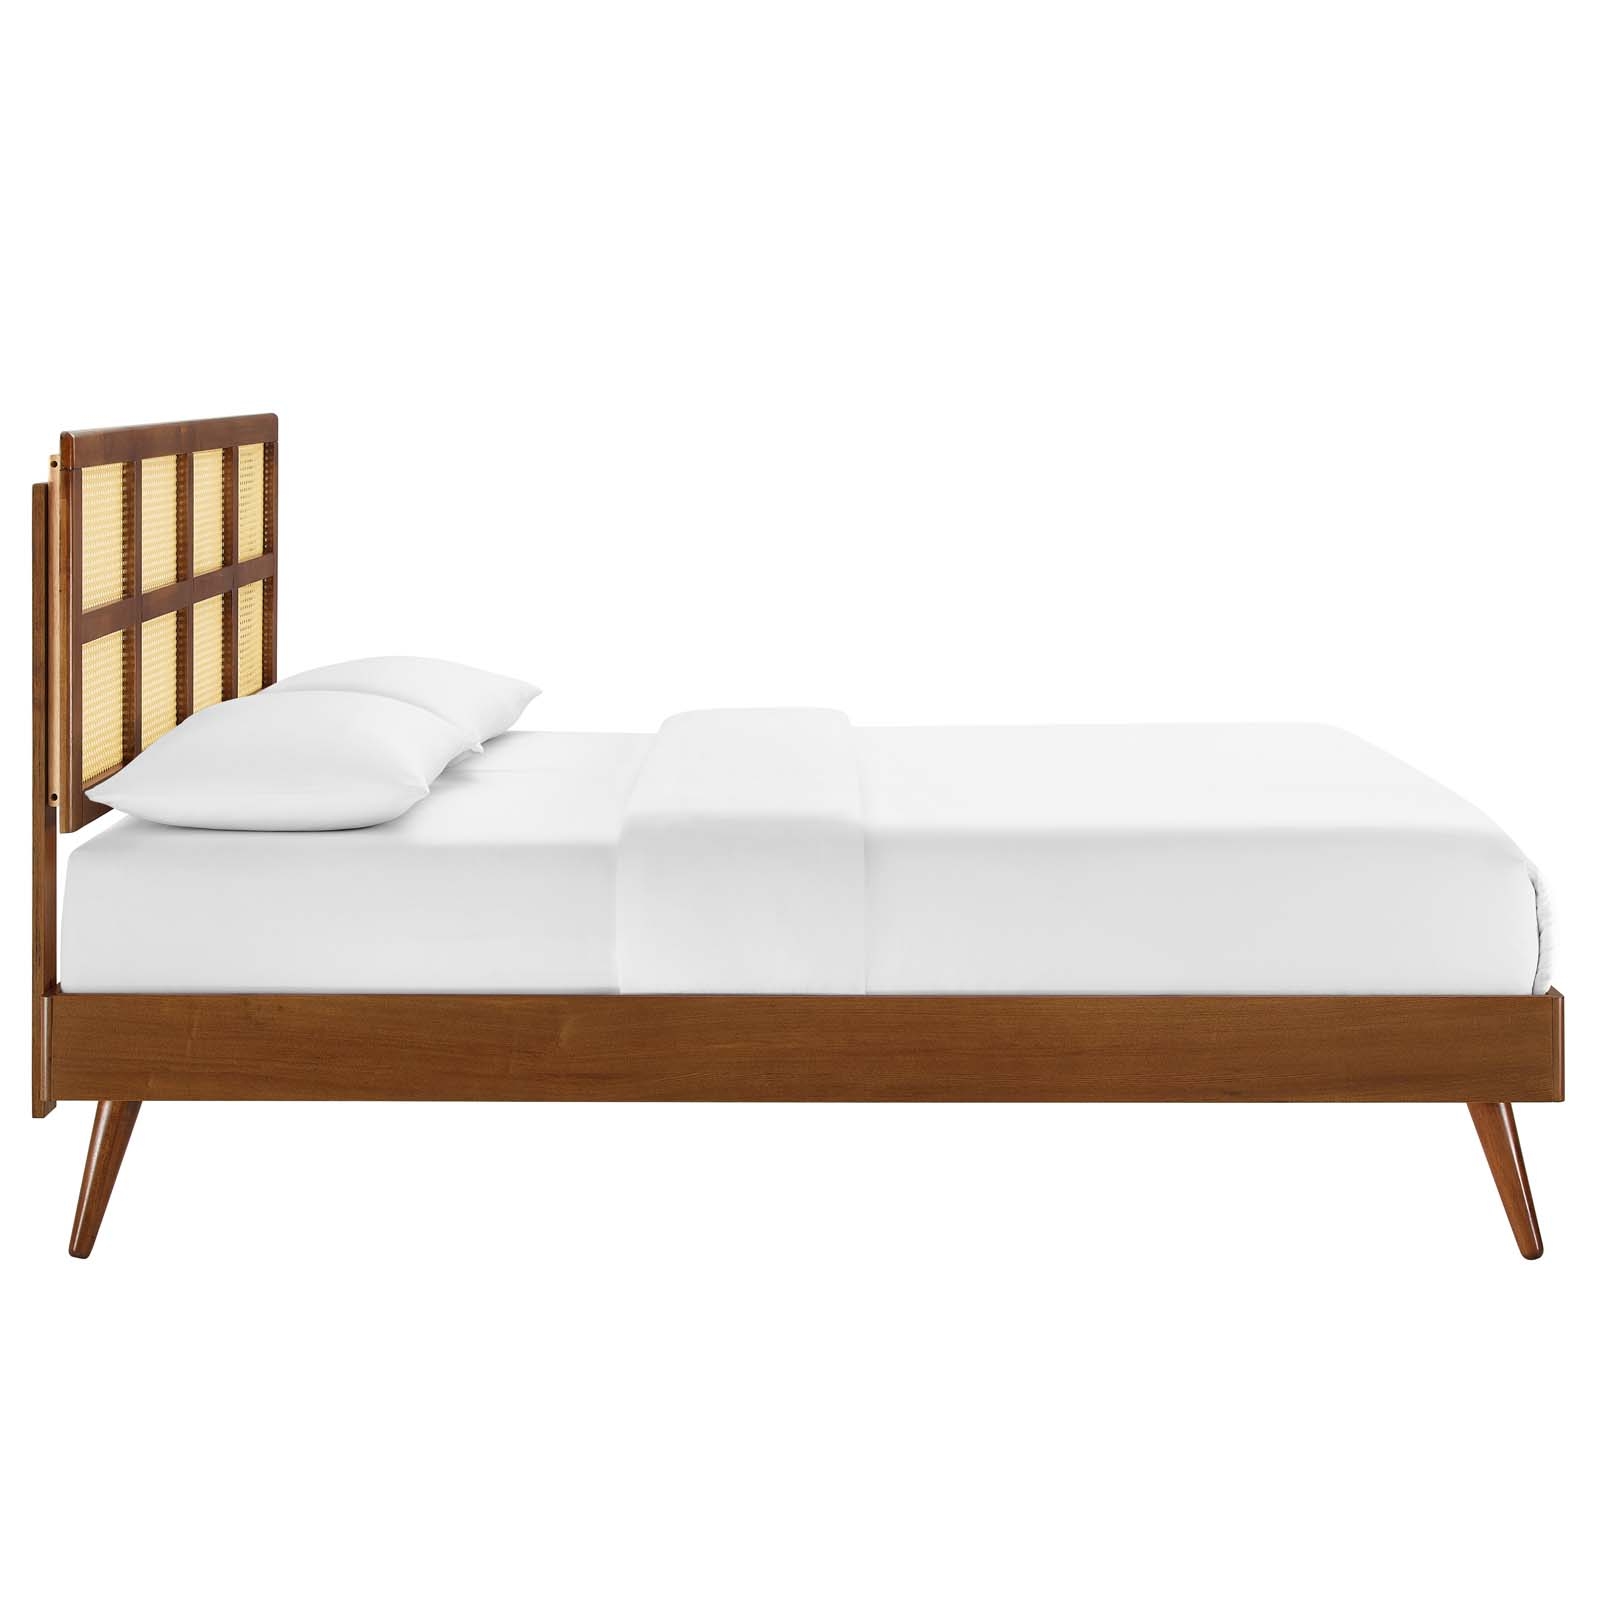 Sidney Cane And Wood Queen Platform Bed With Splayed Legs, Walnut